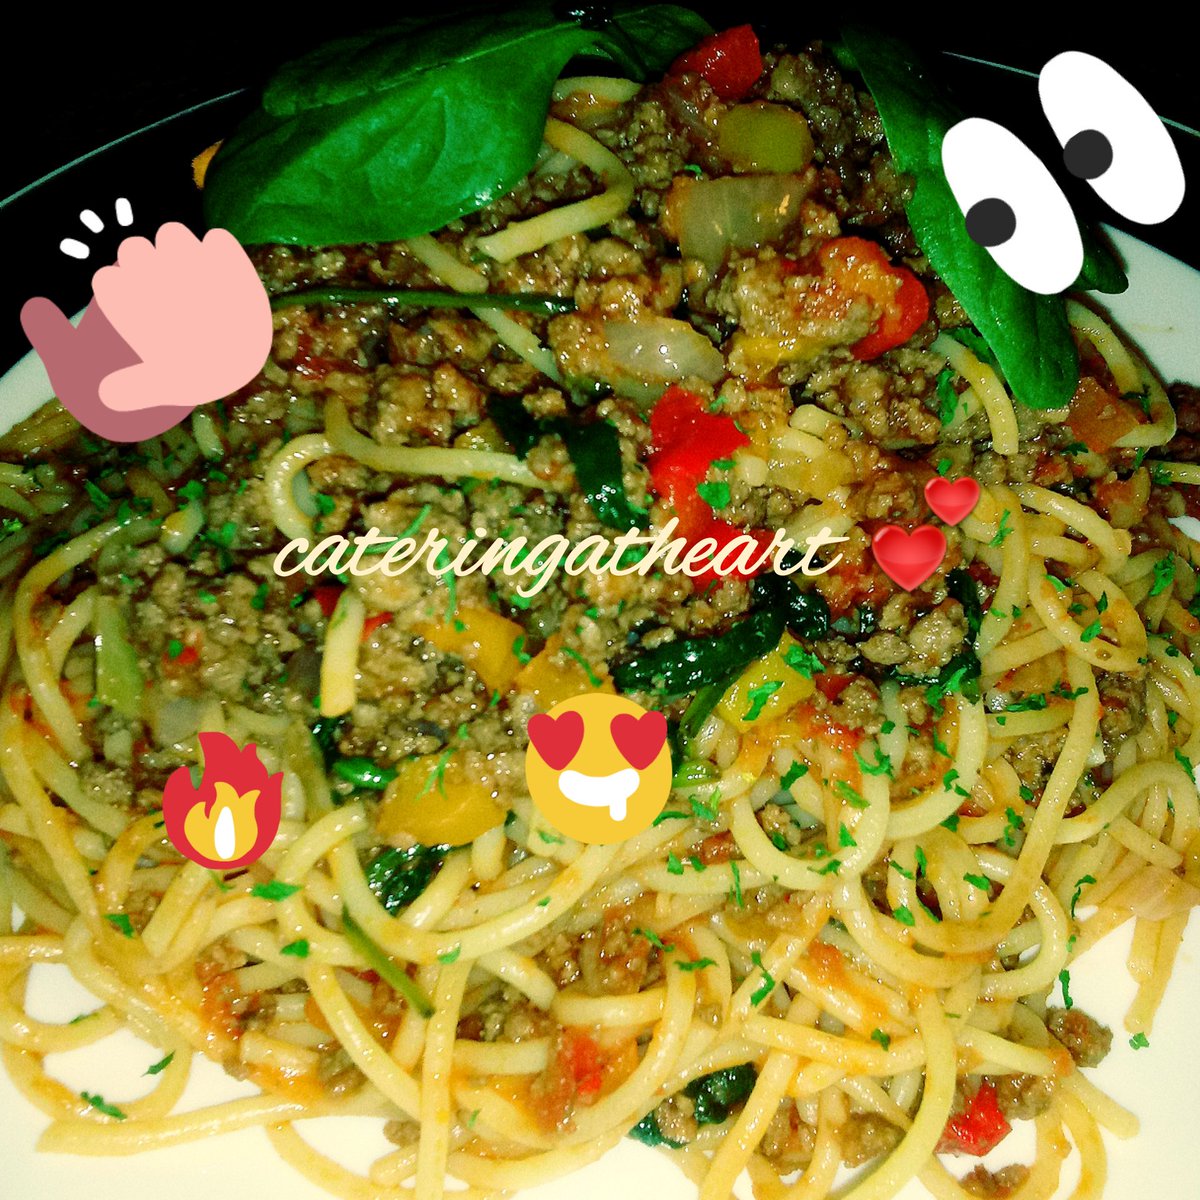 Spaghetti with Veggie Meat Sauce #delicious #healthypasta #sphaghetti #pasta #homemade #Food #cooking #recipe #crafturday #SaturdayMotivation #platters #dinner #cooks #chefs #homecooks #weekendvibes #rain #foodies #foodblog #lovefood #italianfood #healthy #Greens